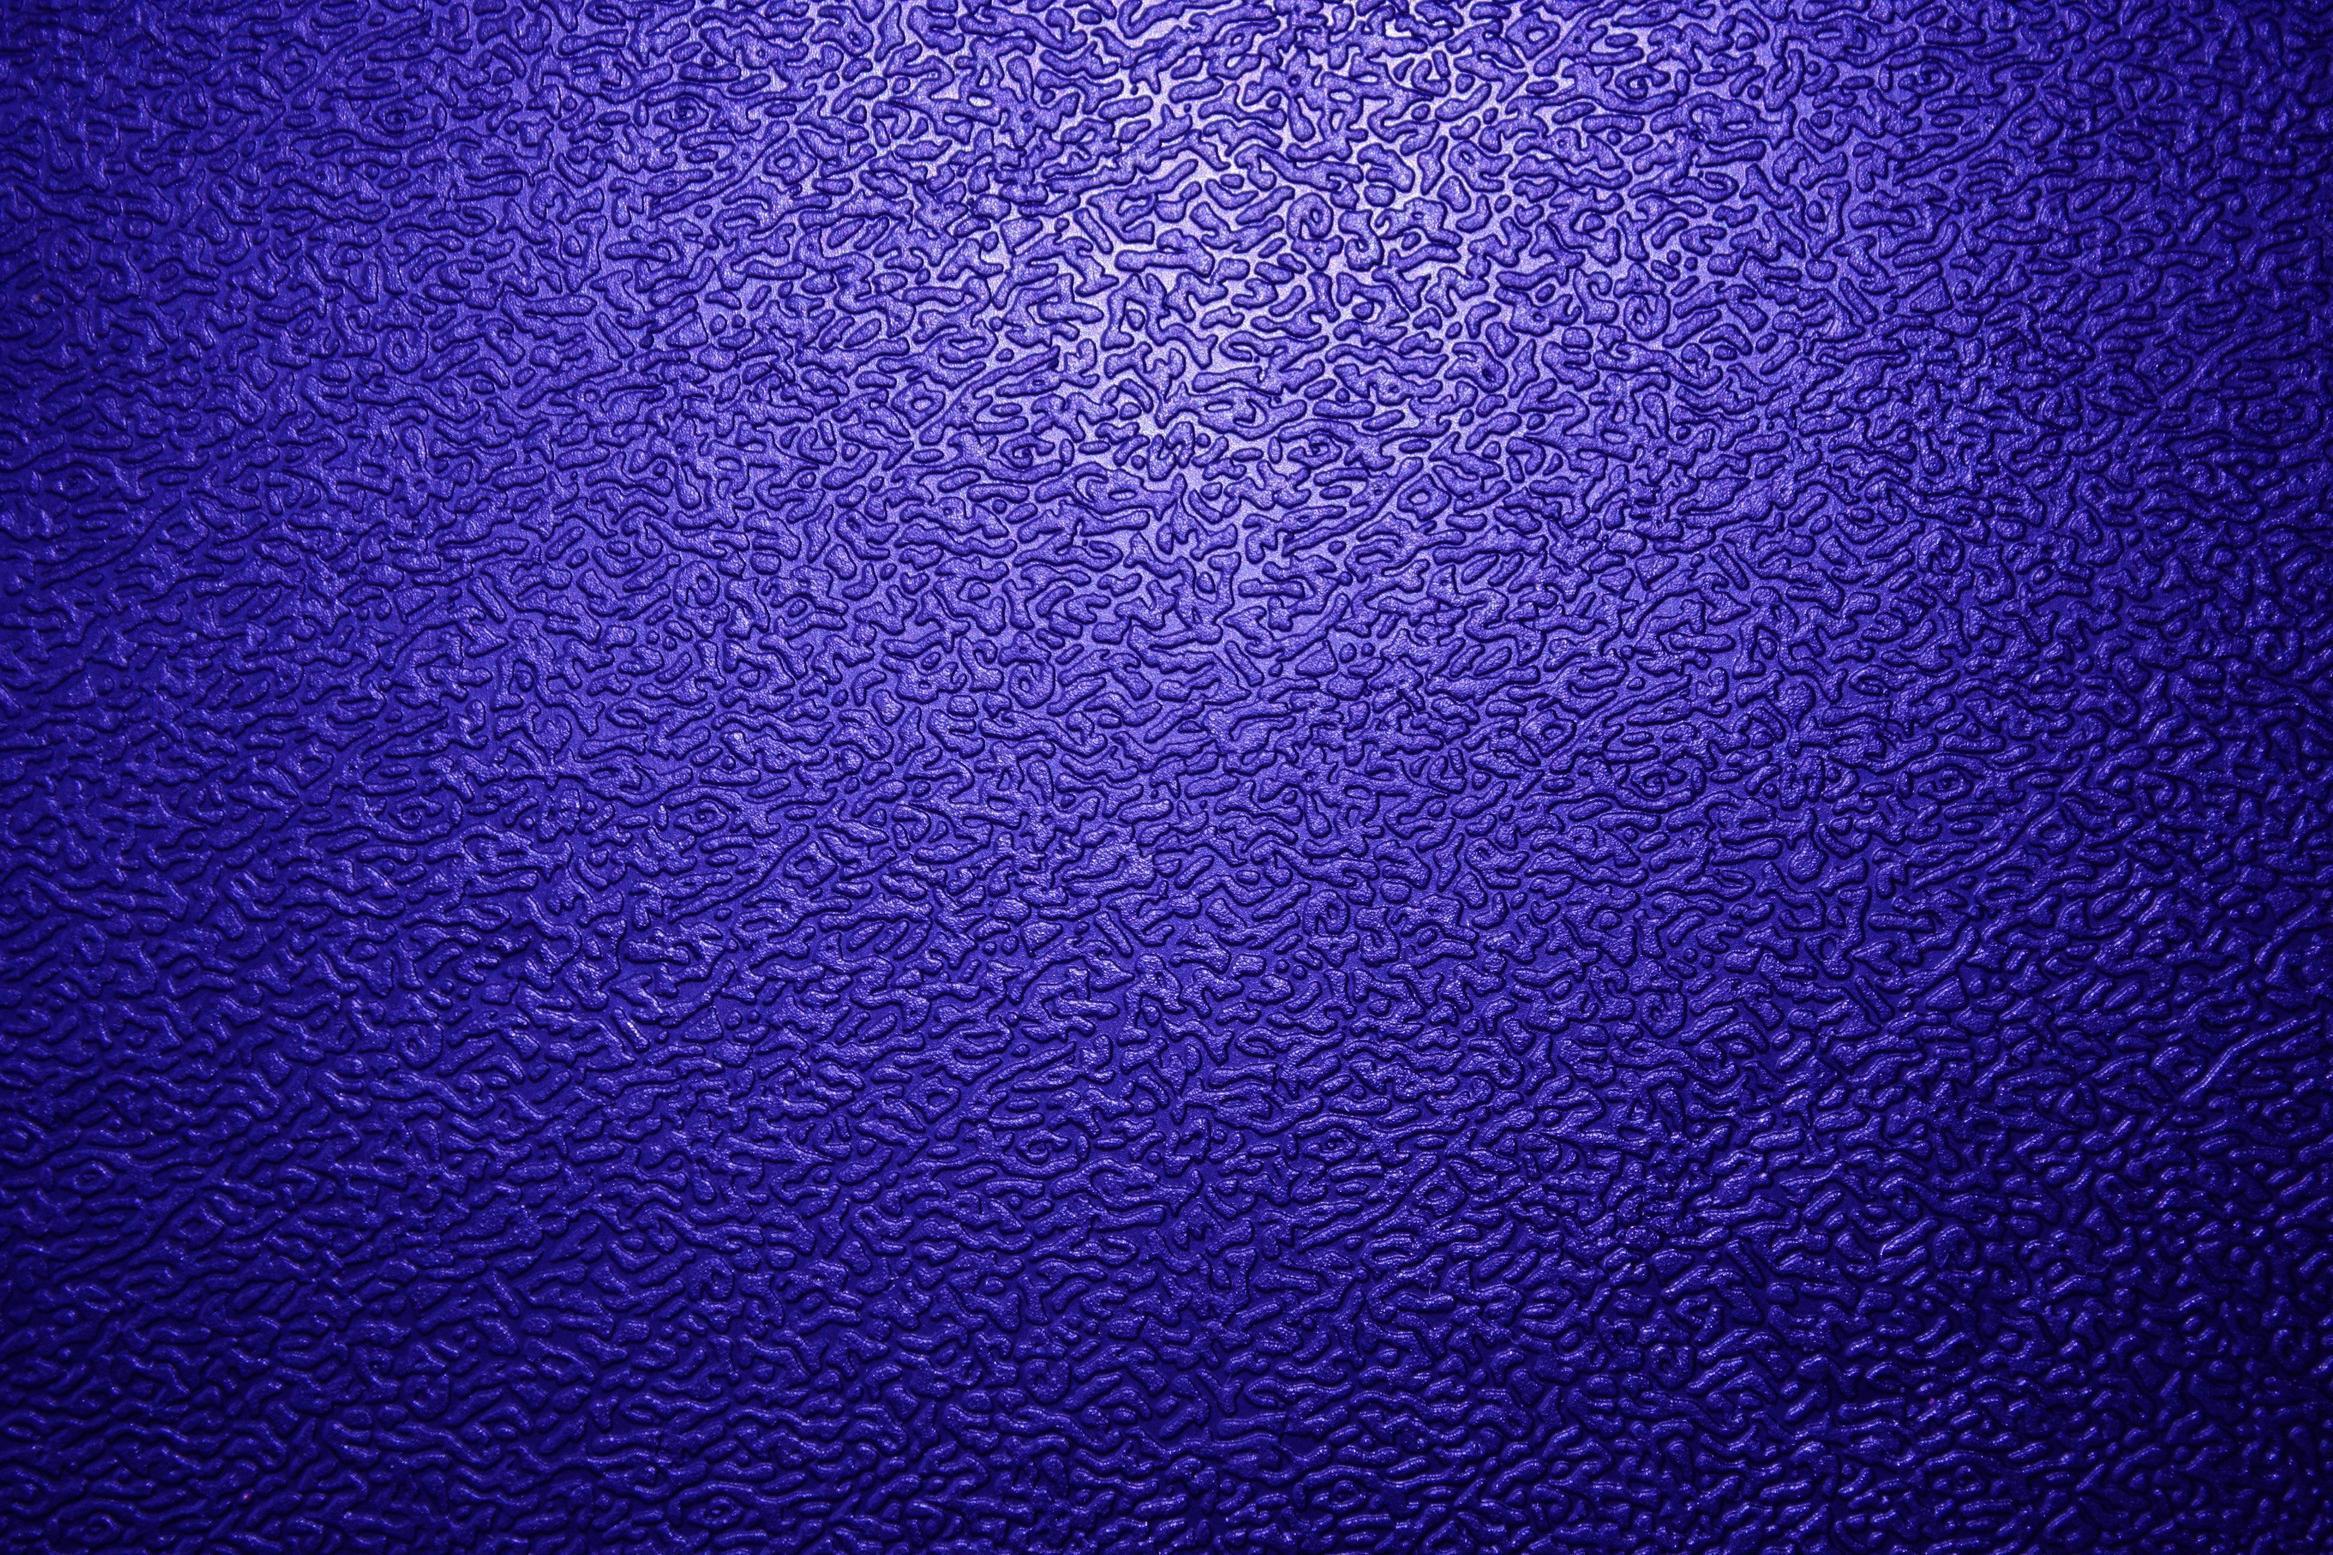 Textured Royal Blue Plastic Close Up Picture